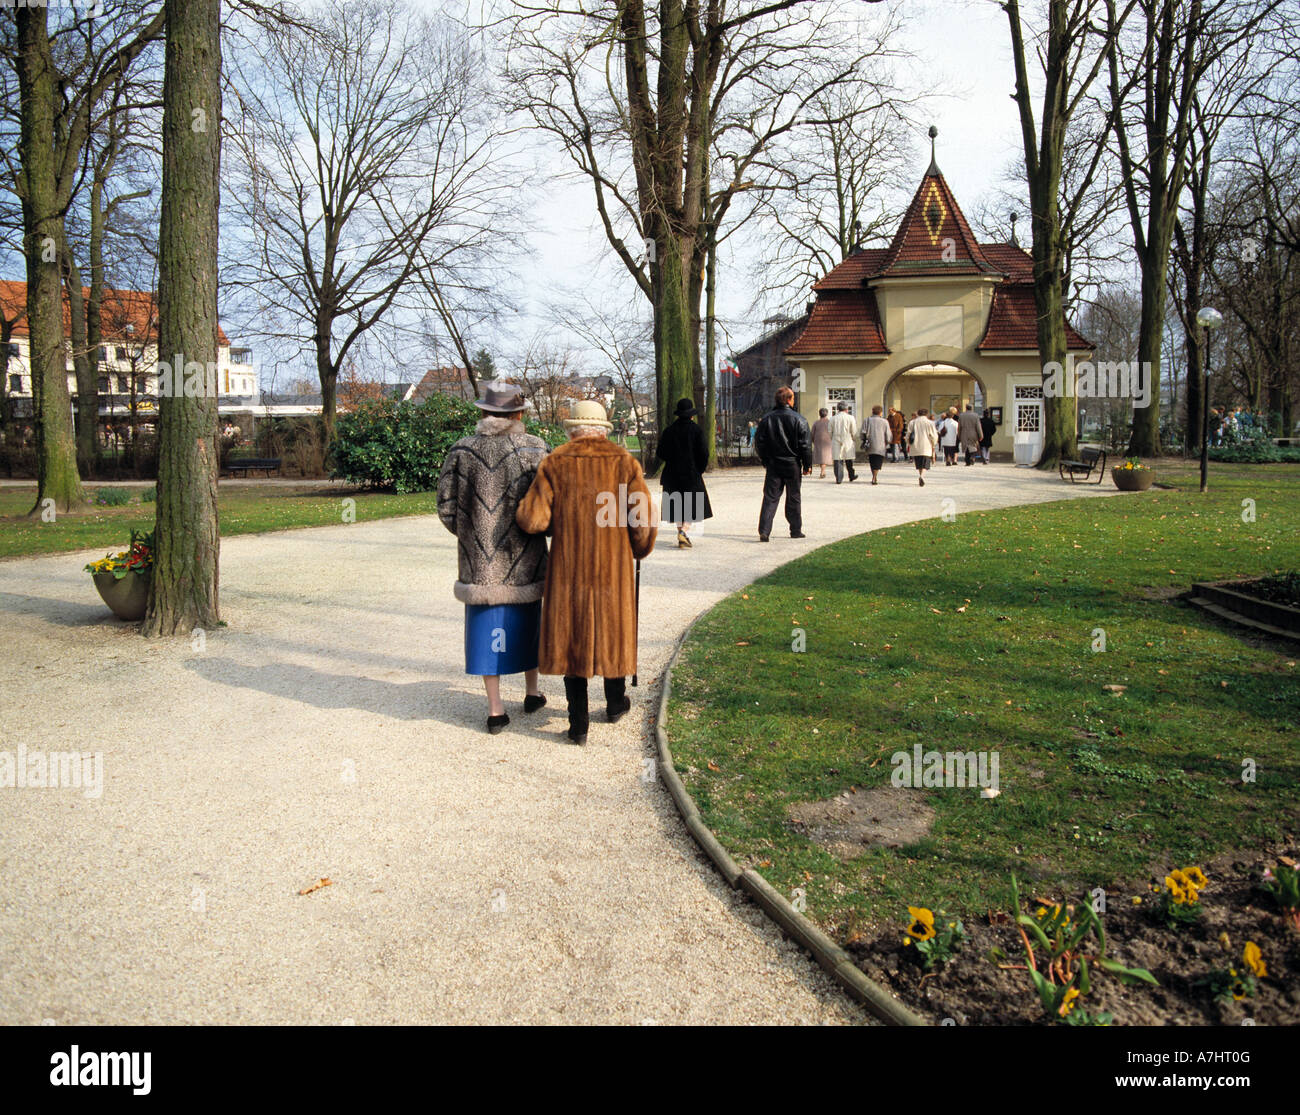 D-Rothenfelde, Osnabrueck Country, nature reserve North Teutoburg Forest-Wiehengebirge, Lower Saxony, people walking in the spa gardens, two older women in fur jacket and fur coat, salt works Stock Photo